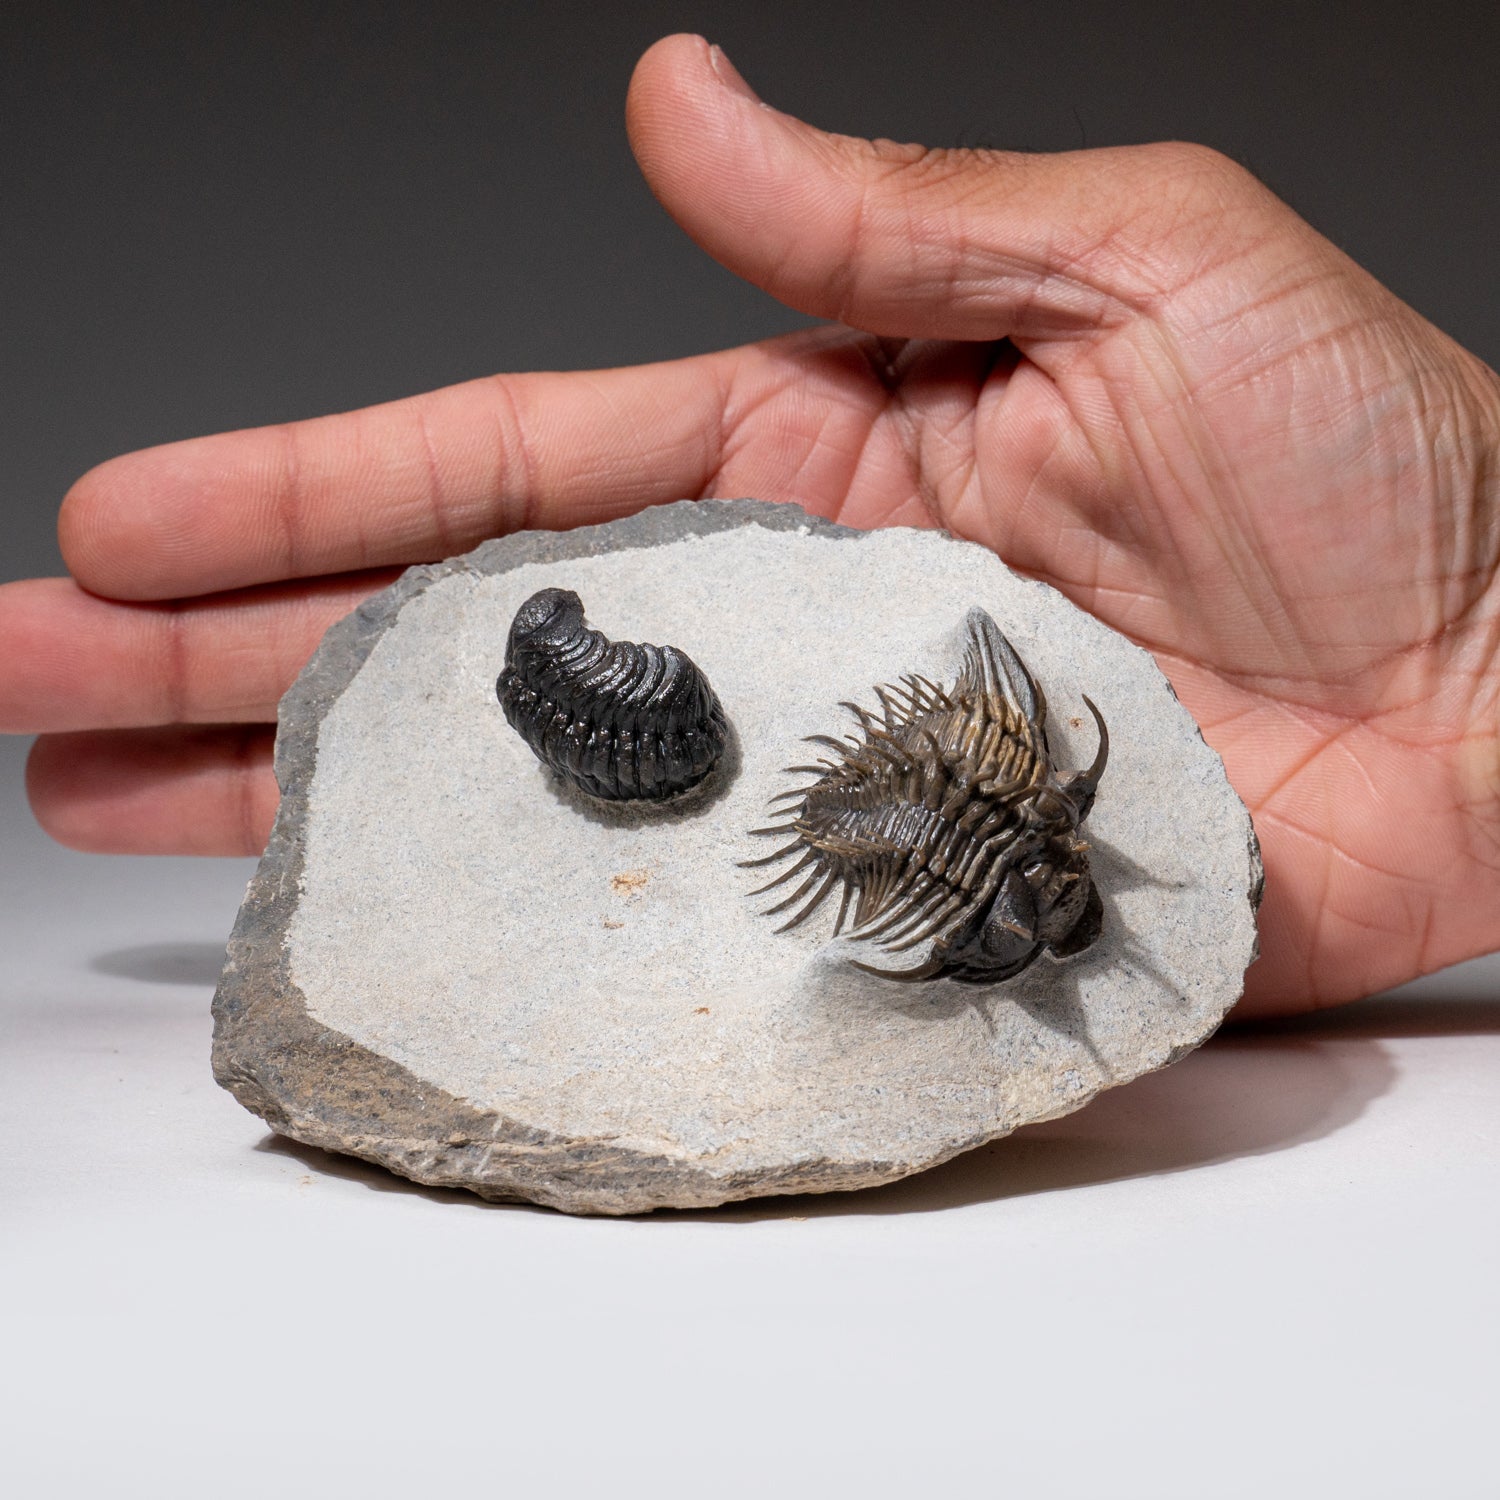 Two Ceratarges Spinosus Trilobite from Morocco (454.6 grams)